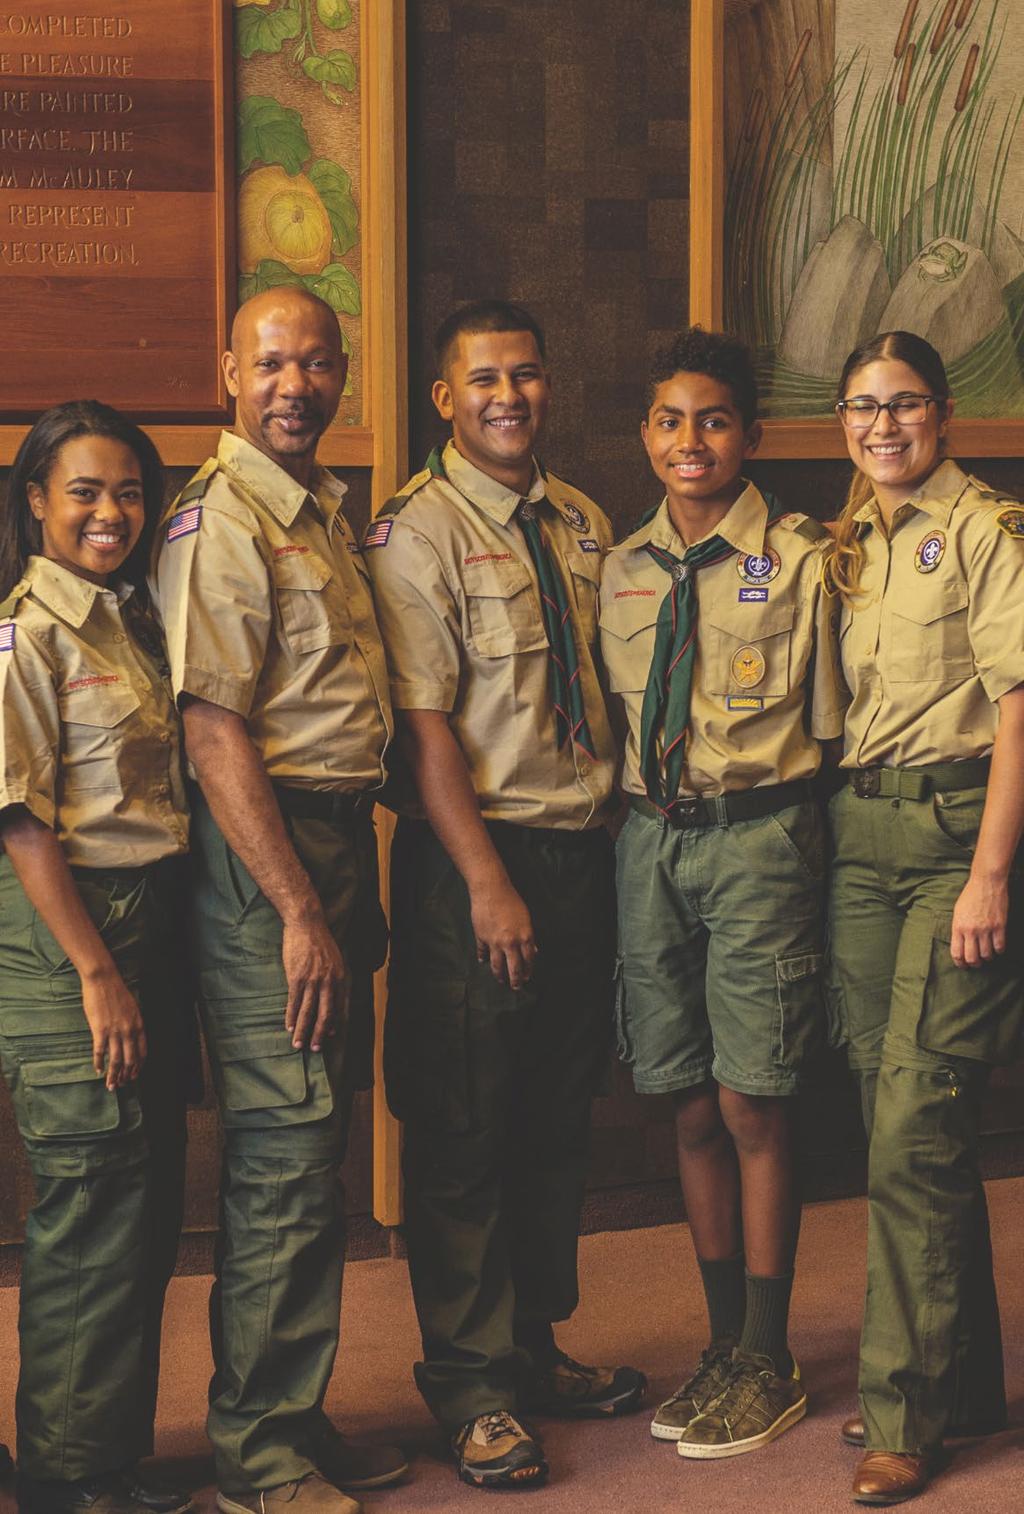 Leadership Positions that are shared between the Linked Troops: Chartered Organization Representative Committee Chair Committee Members Assistant Scoutmasters Not